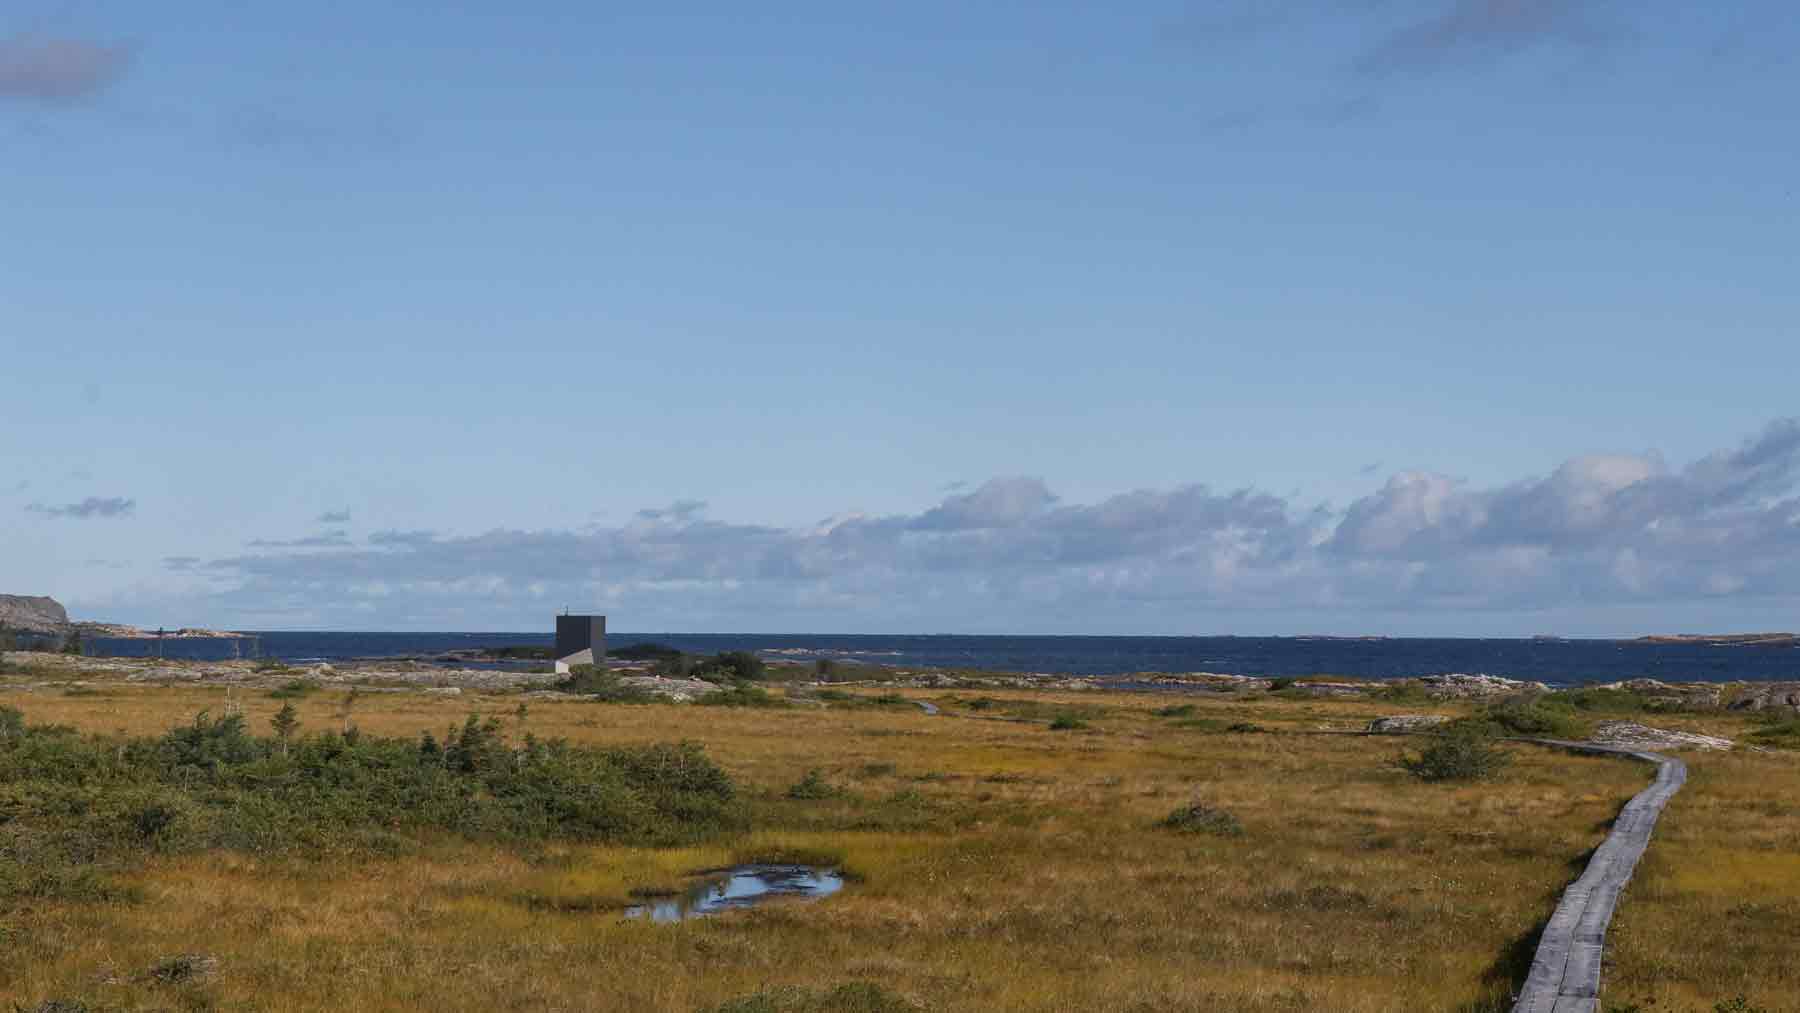 Tower artists studio in the distance with the rickety wooden boardwalk on Fogo Island